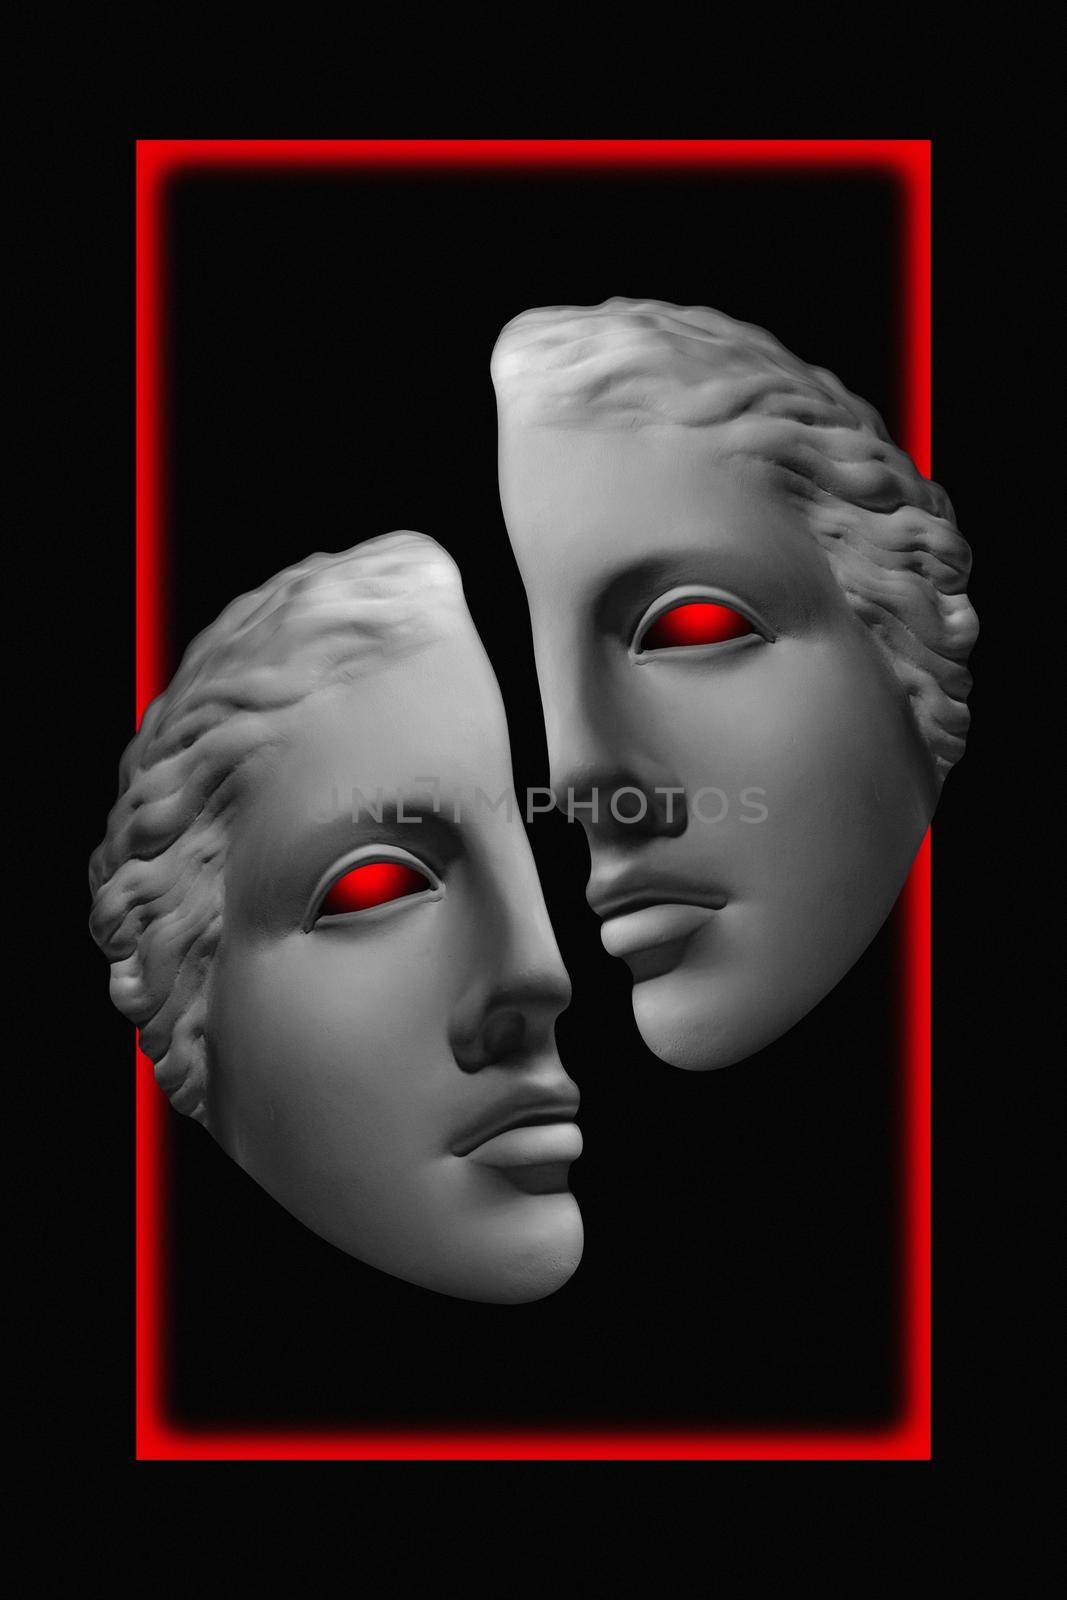 Antique sculpture of human face surreal collage in pop art style. Modern image with cut details of statue head. Red eyes. Dark concept. Zine culture. Contemporary art poster. Funky retro minimalism. by bashta